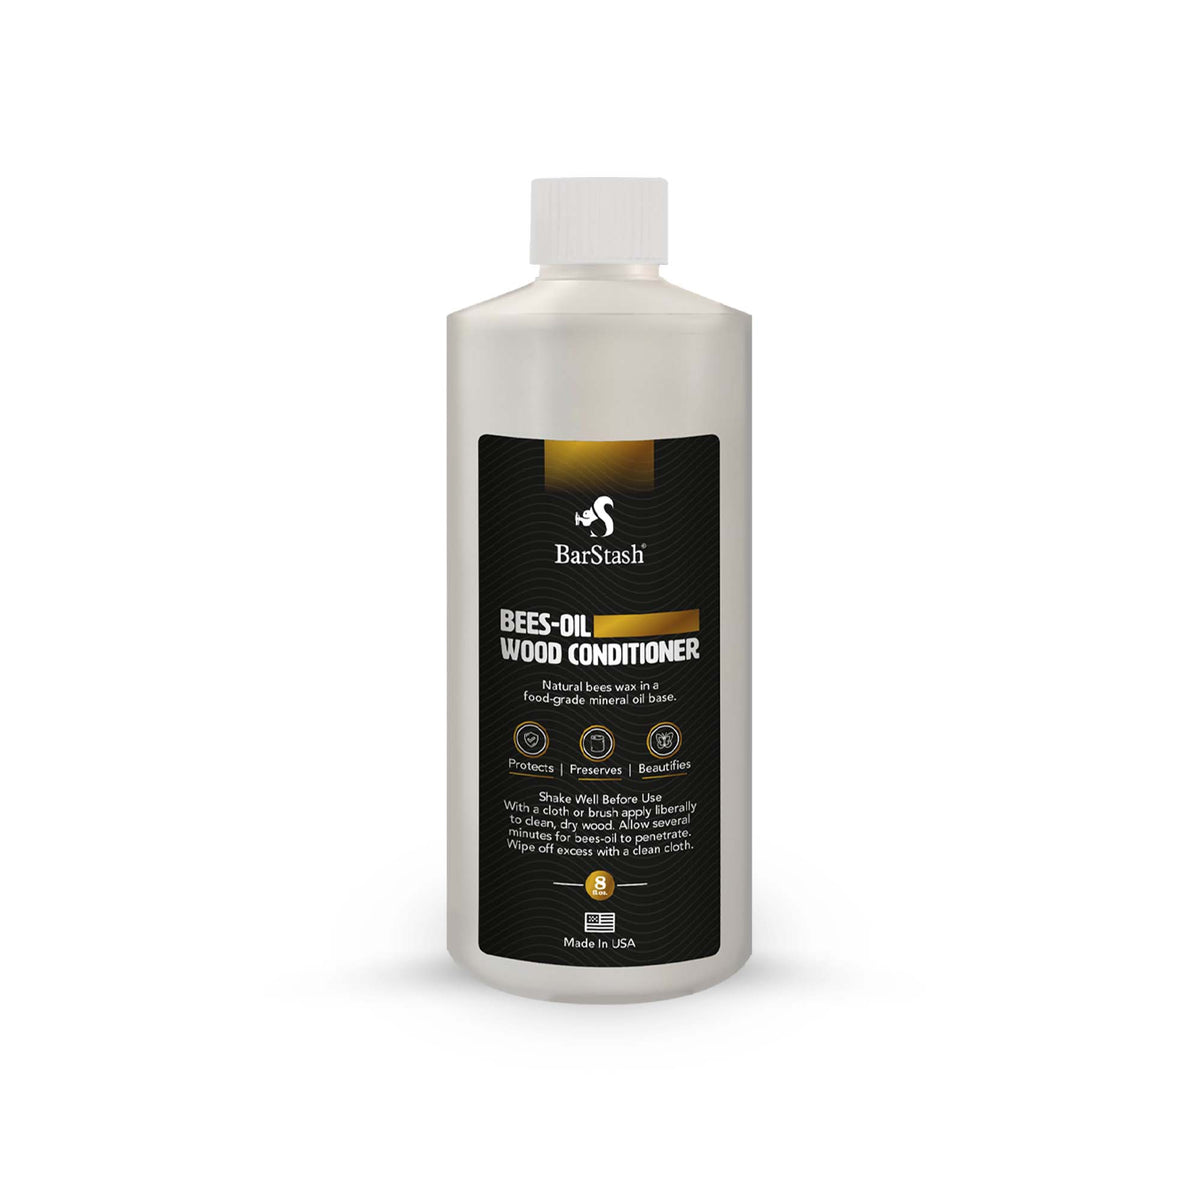 BarStash's Bees-Oil Wood Conditioner